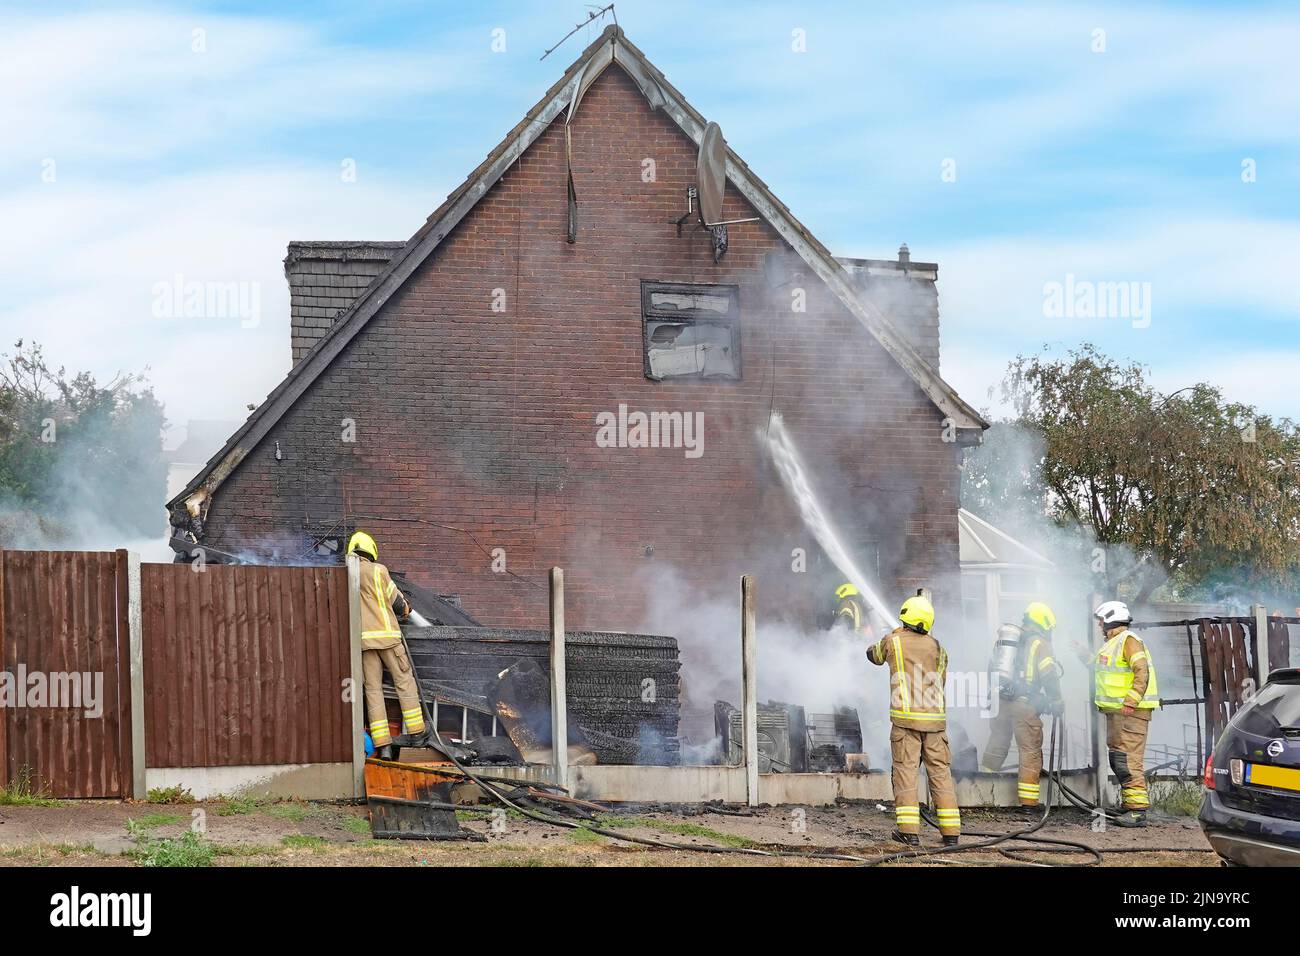 Essex Fire and Rescue Service firefighters in protective clothing dangerous & hazardous work house fire working damping down wall & debris England UK Stock Photo